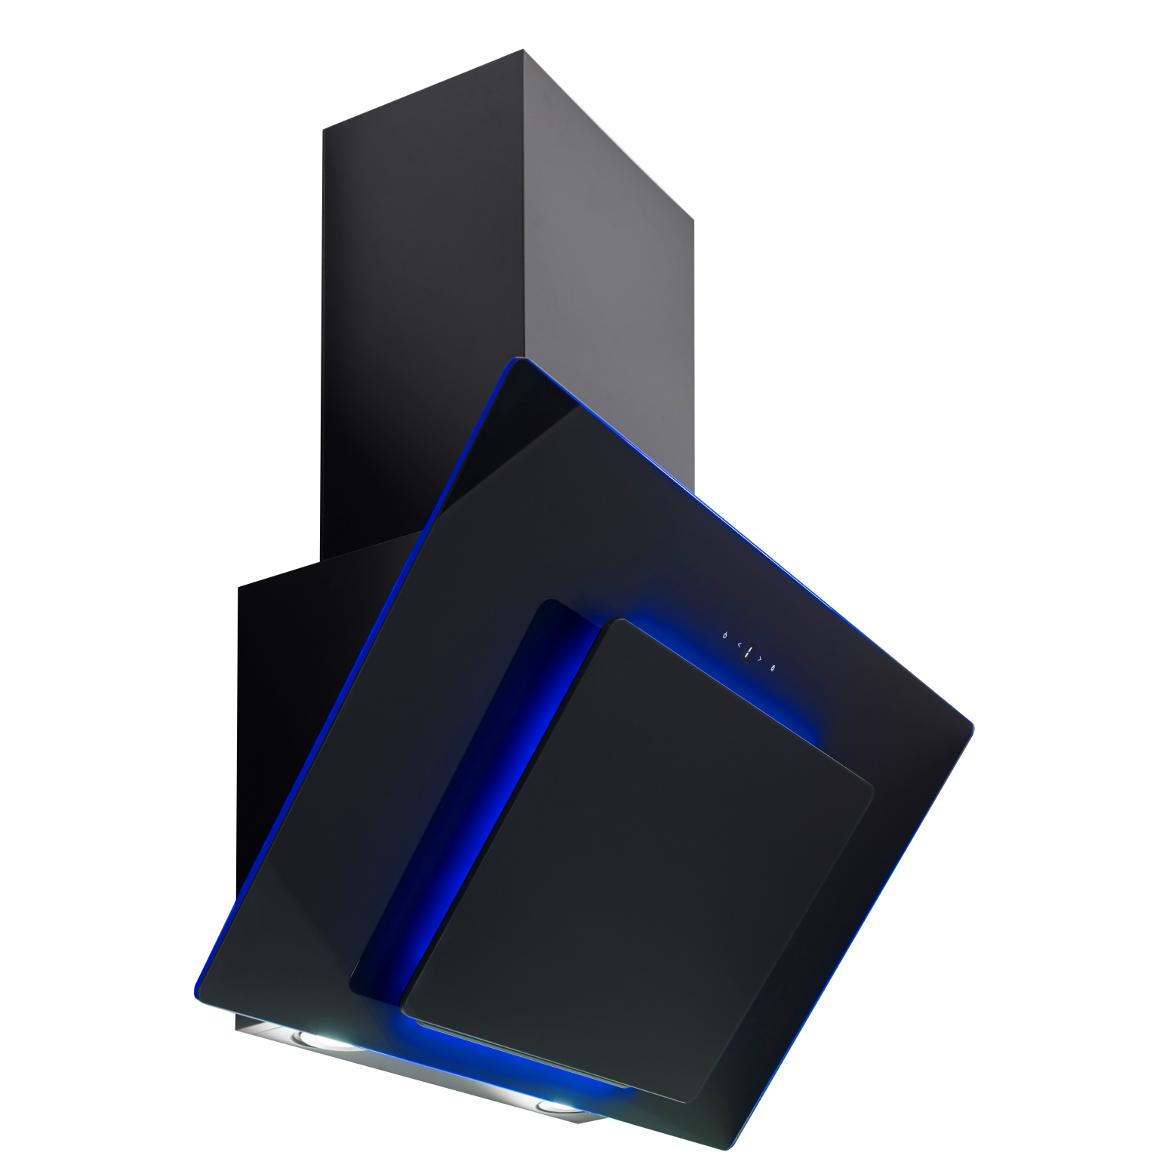 Image of Culina UBHHH70BK 70cm Angled Chimney Hood in Black Glass Touch Control